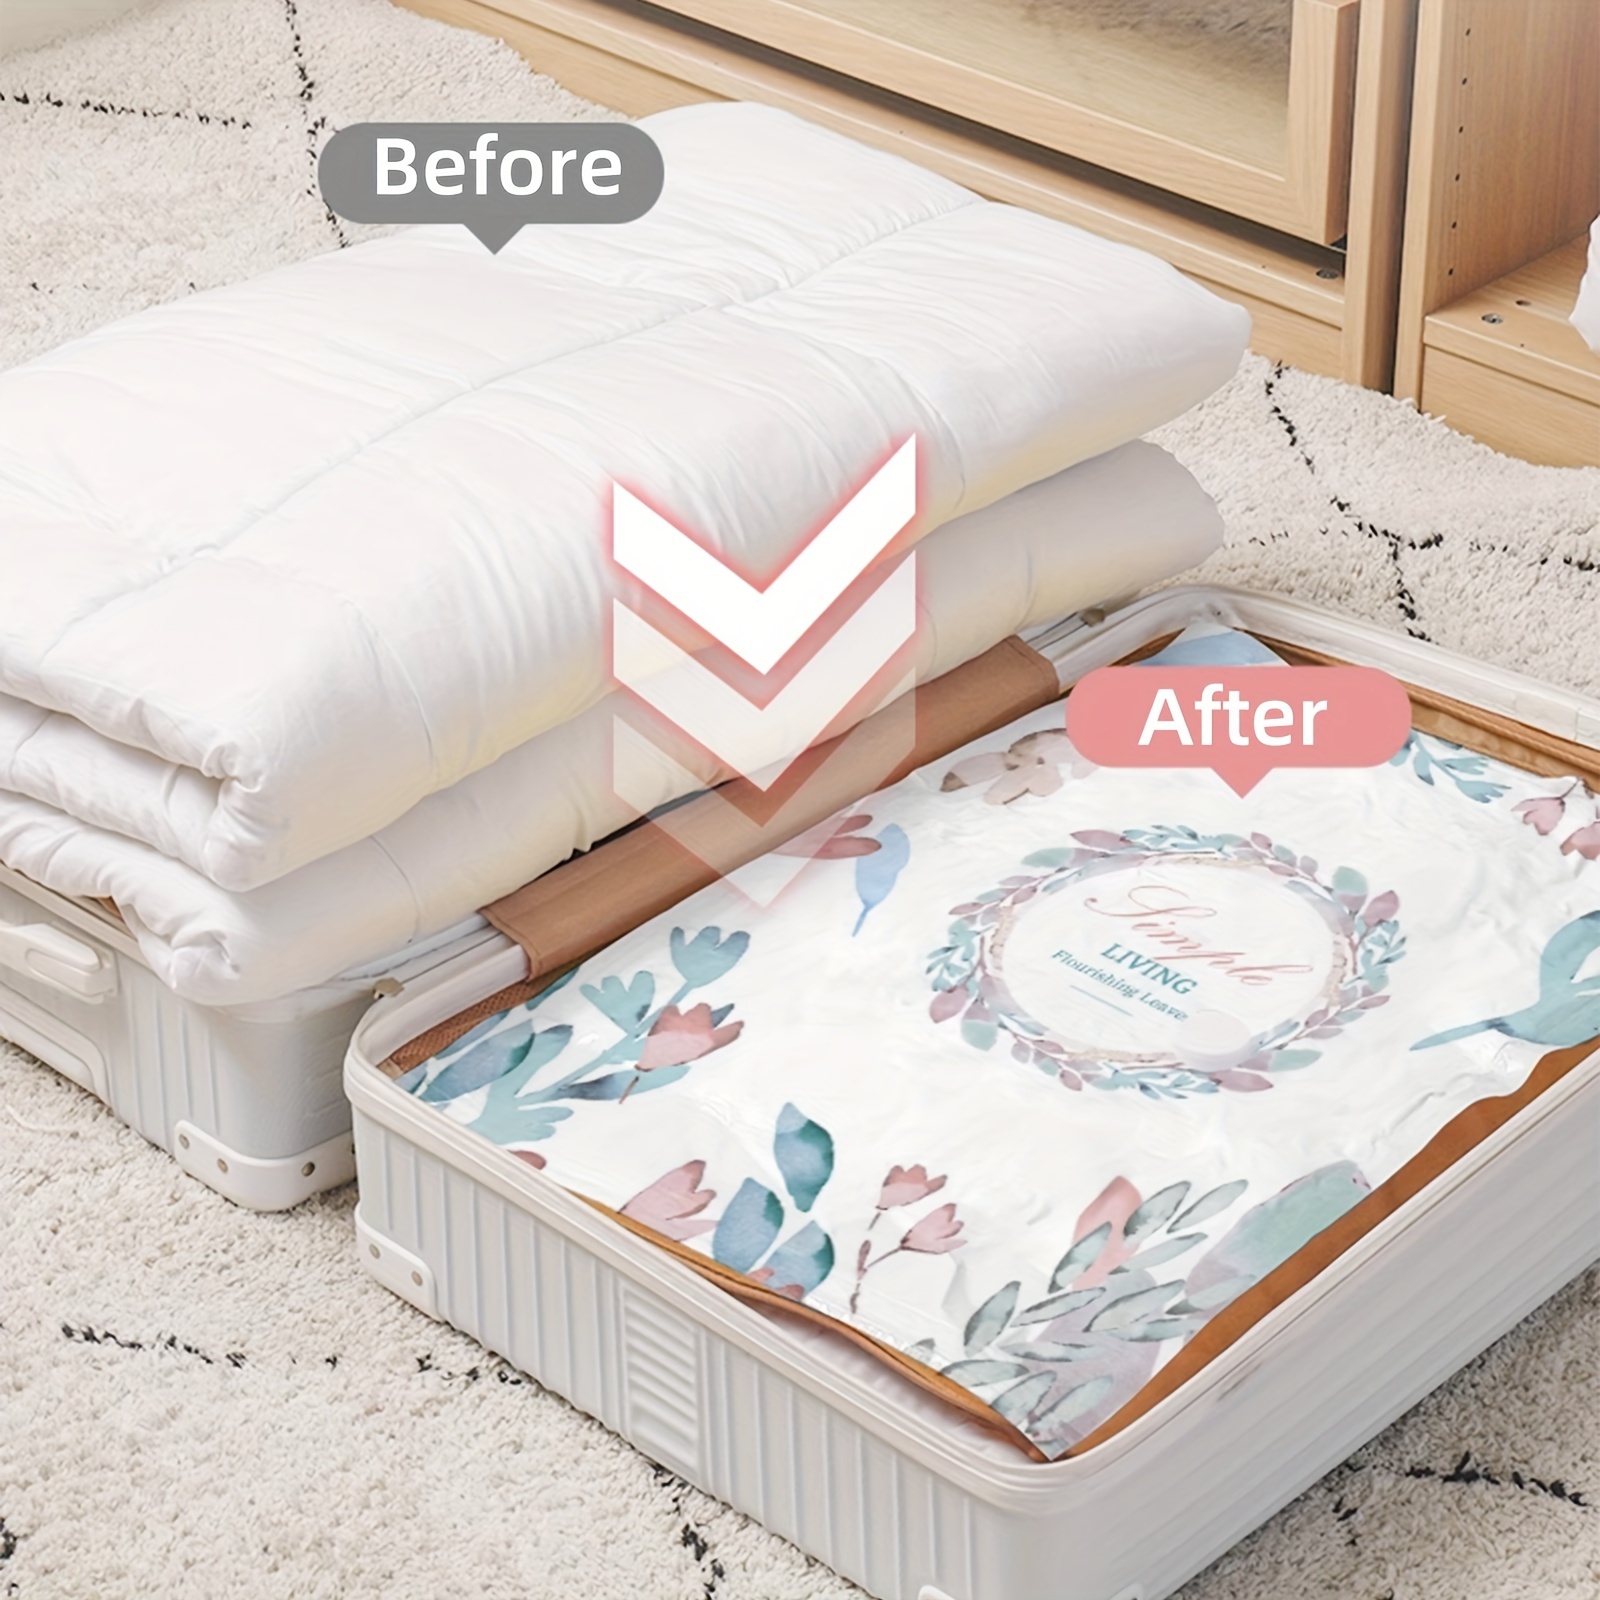 Clothes Storage Bags for Comforters 6pcs, Blanket, Bedding